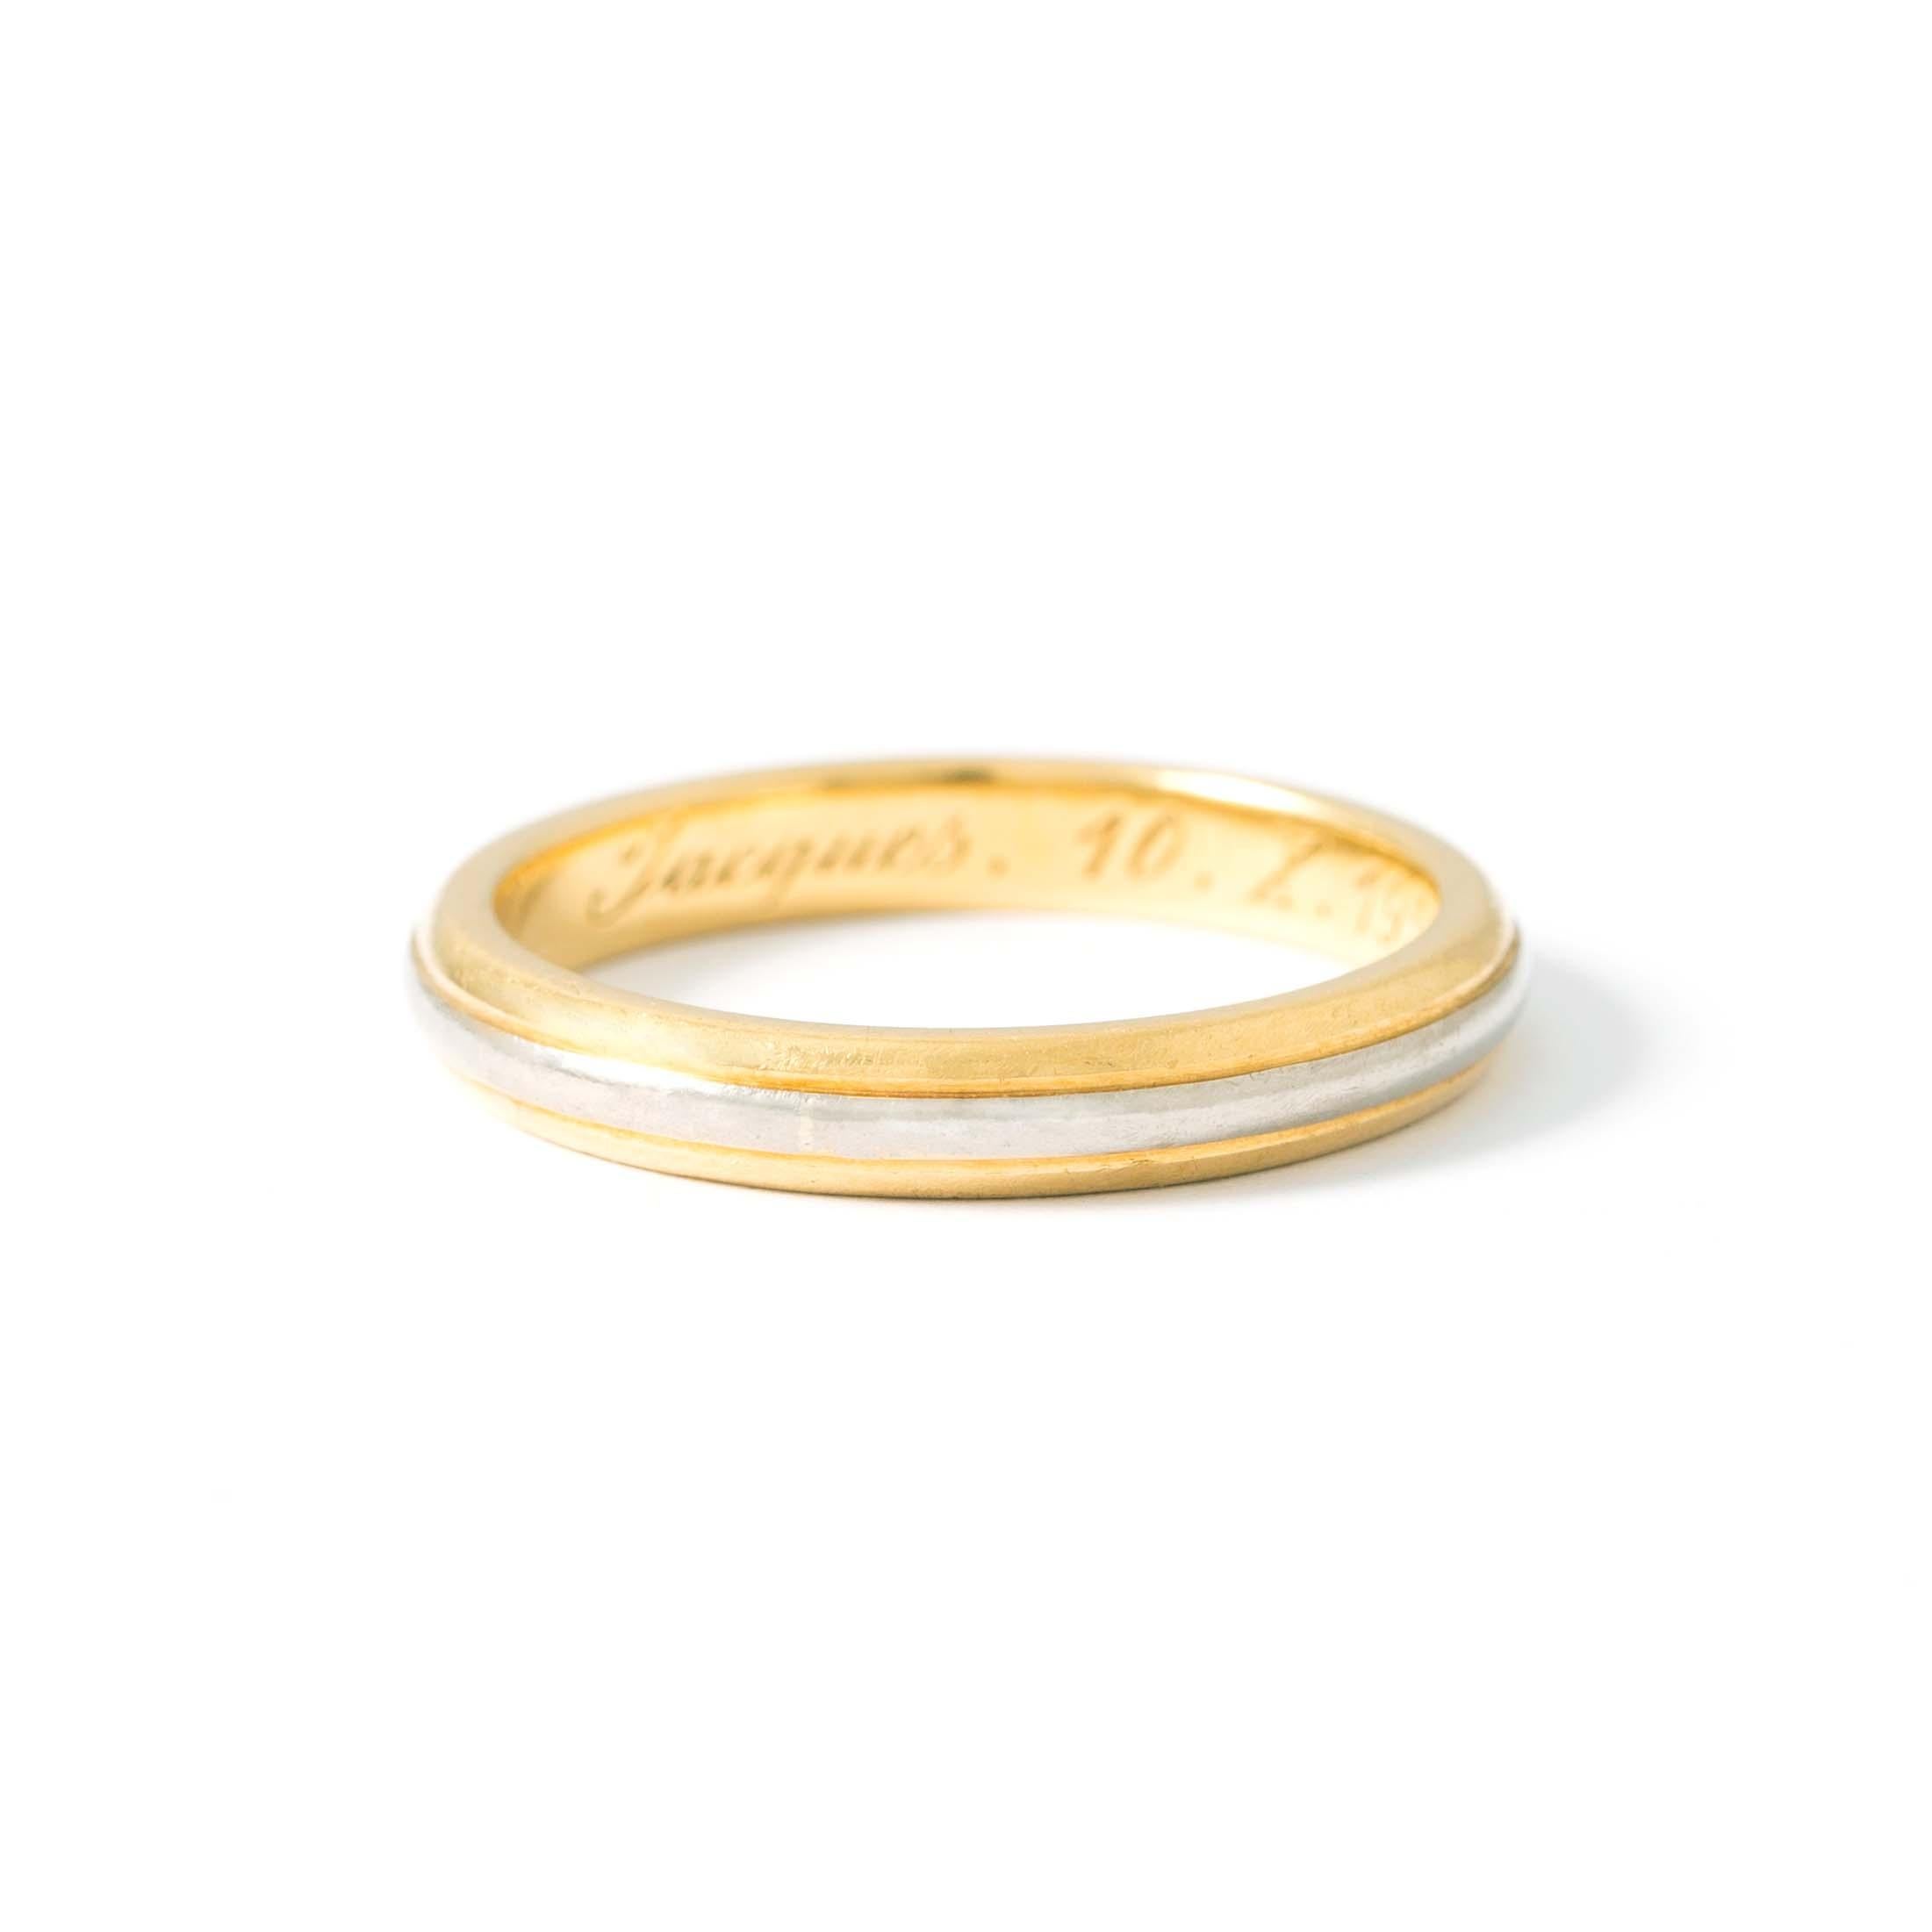 Wedding ring in 18K yellow and white gold. Interior engraving. Dated 1955.
Size: 53. 
Weight: 3.96 grams.